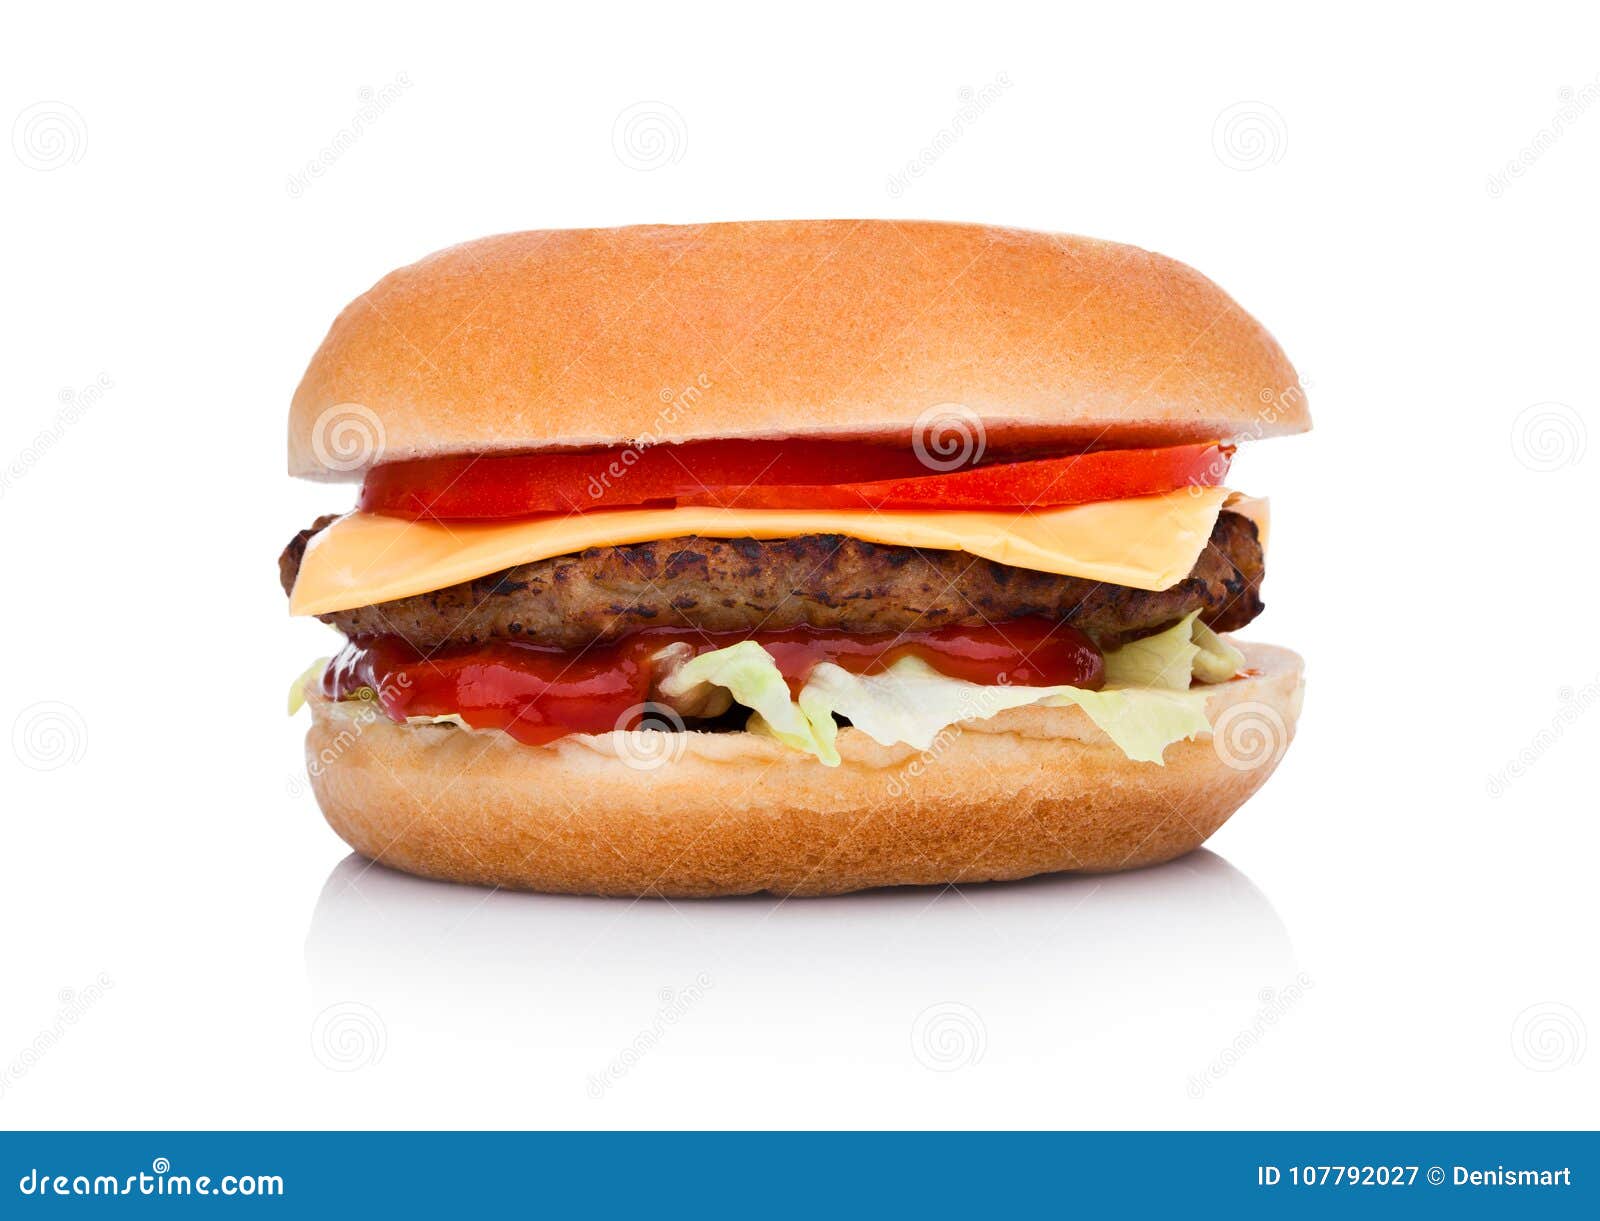 Classic Beef Cheeseburger With Vegetables Stock Image - Image of double ...